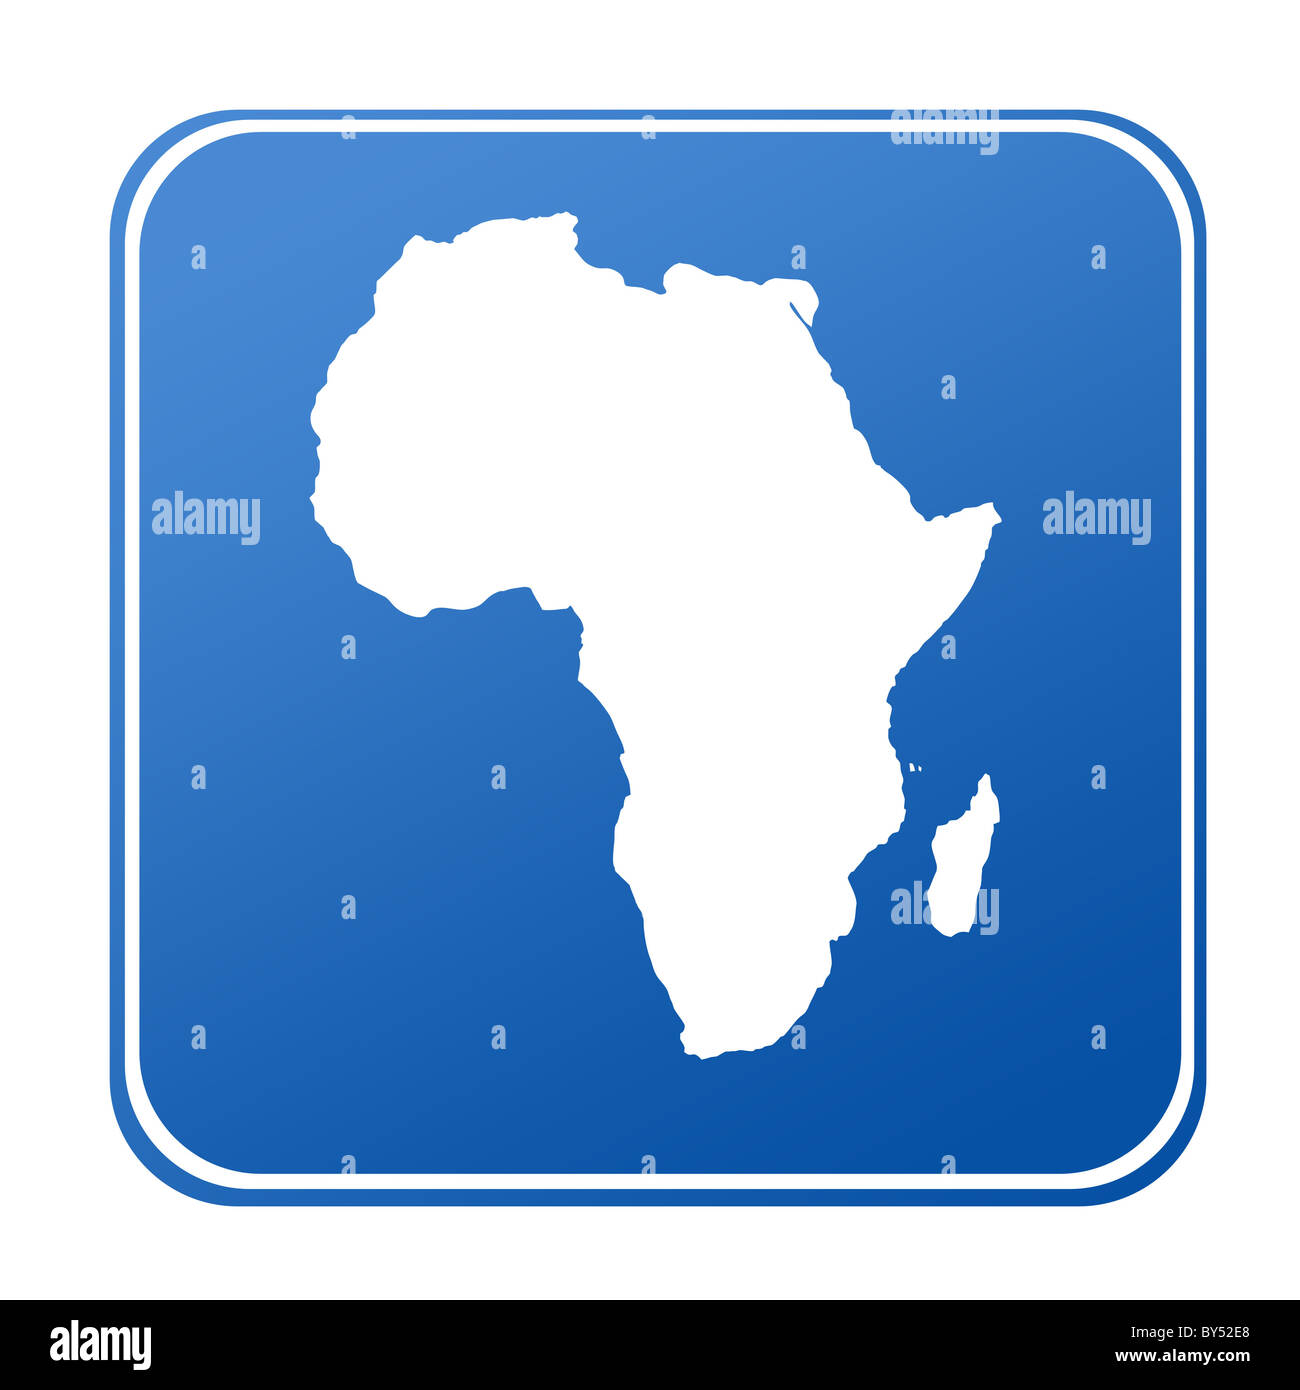 Map of Africa on blue button; isolated on white background. Stock Photo